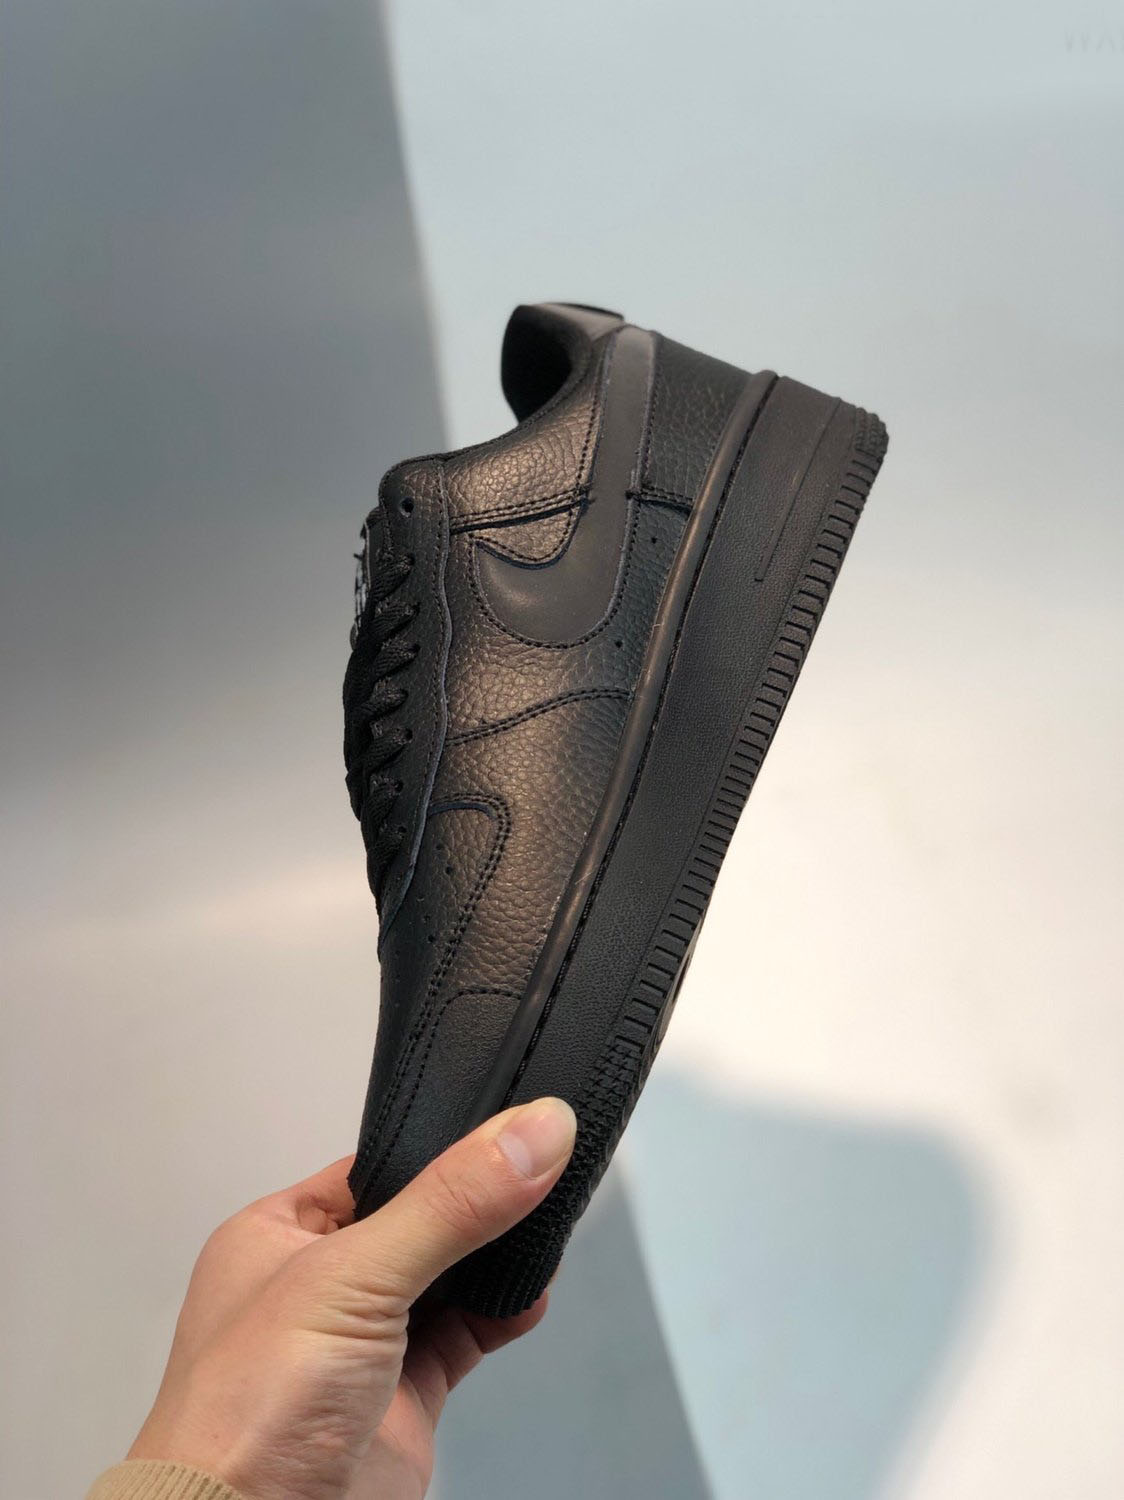 Nike Air Force 1 Low Black Reflective Swooshes For Sale – Sneaker Hello